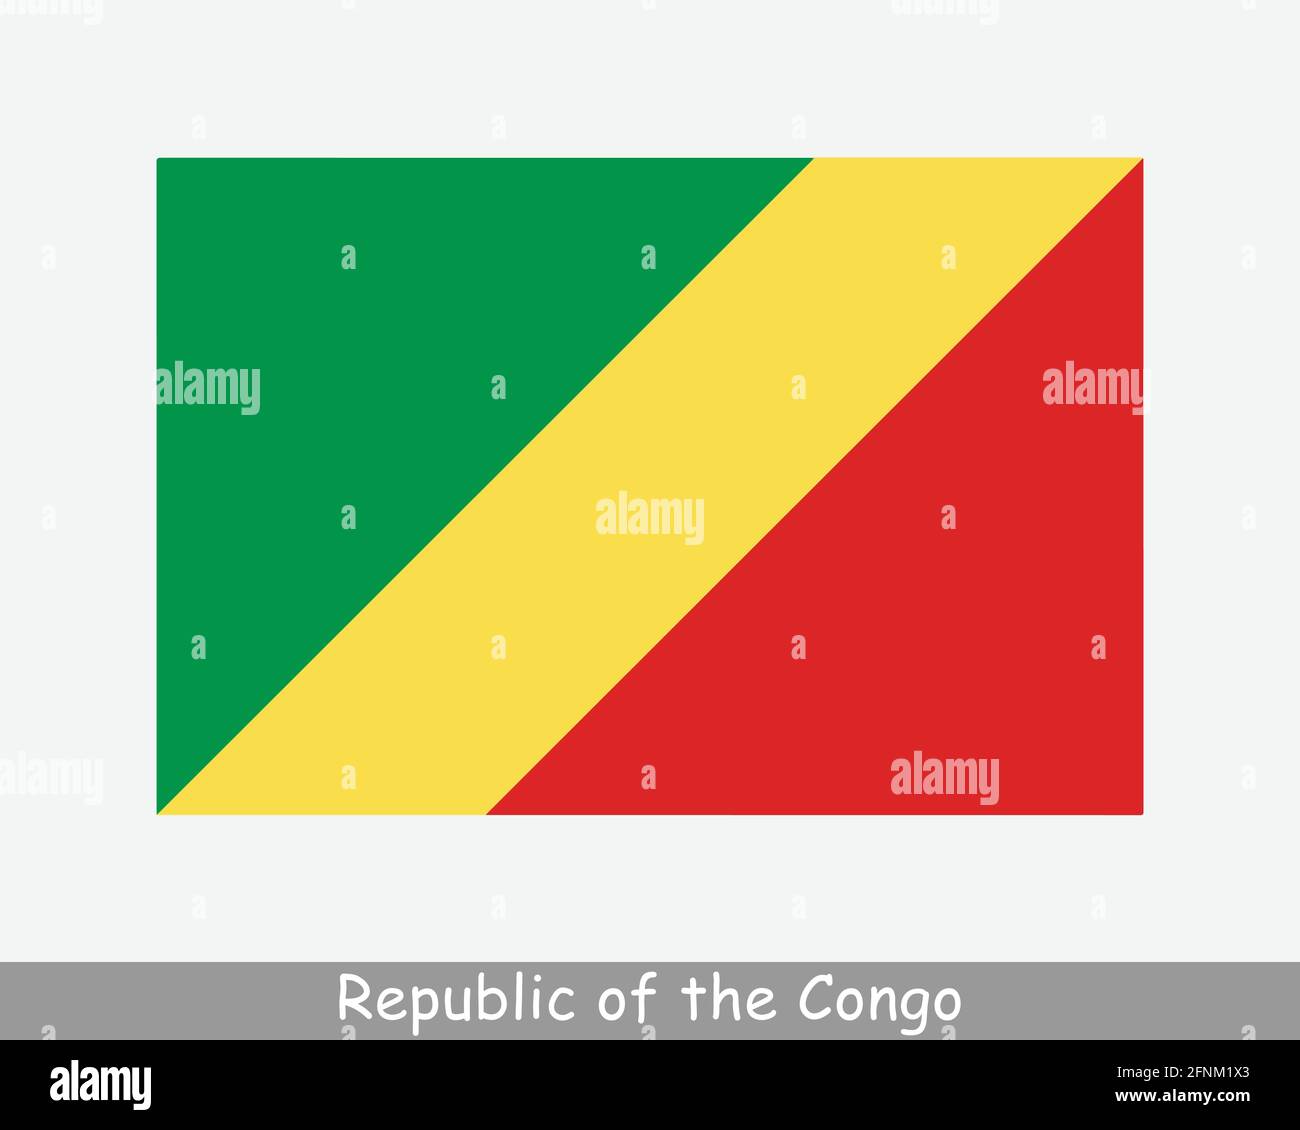 Fichier:Flag of the Republic of the Congo (Léopoldville) (1960